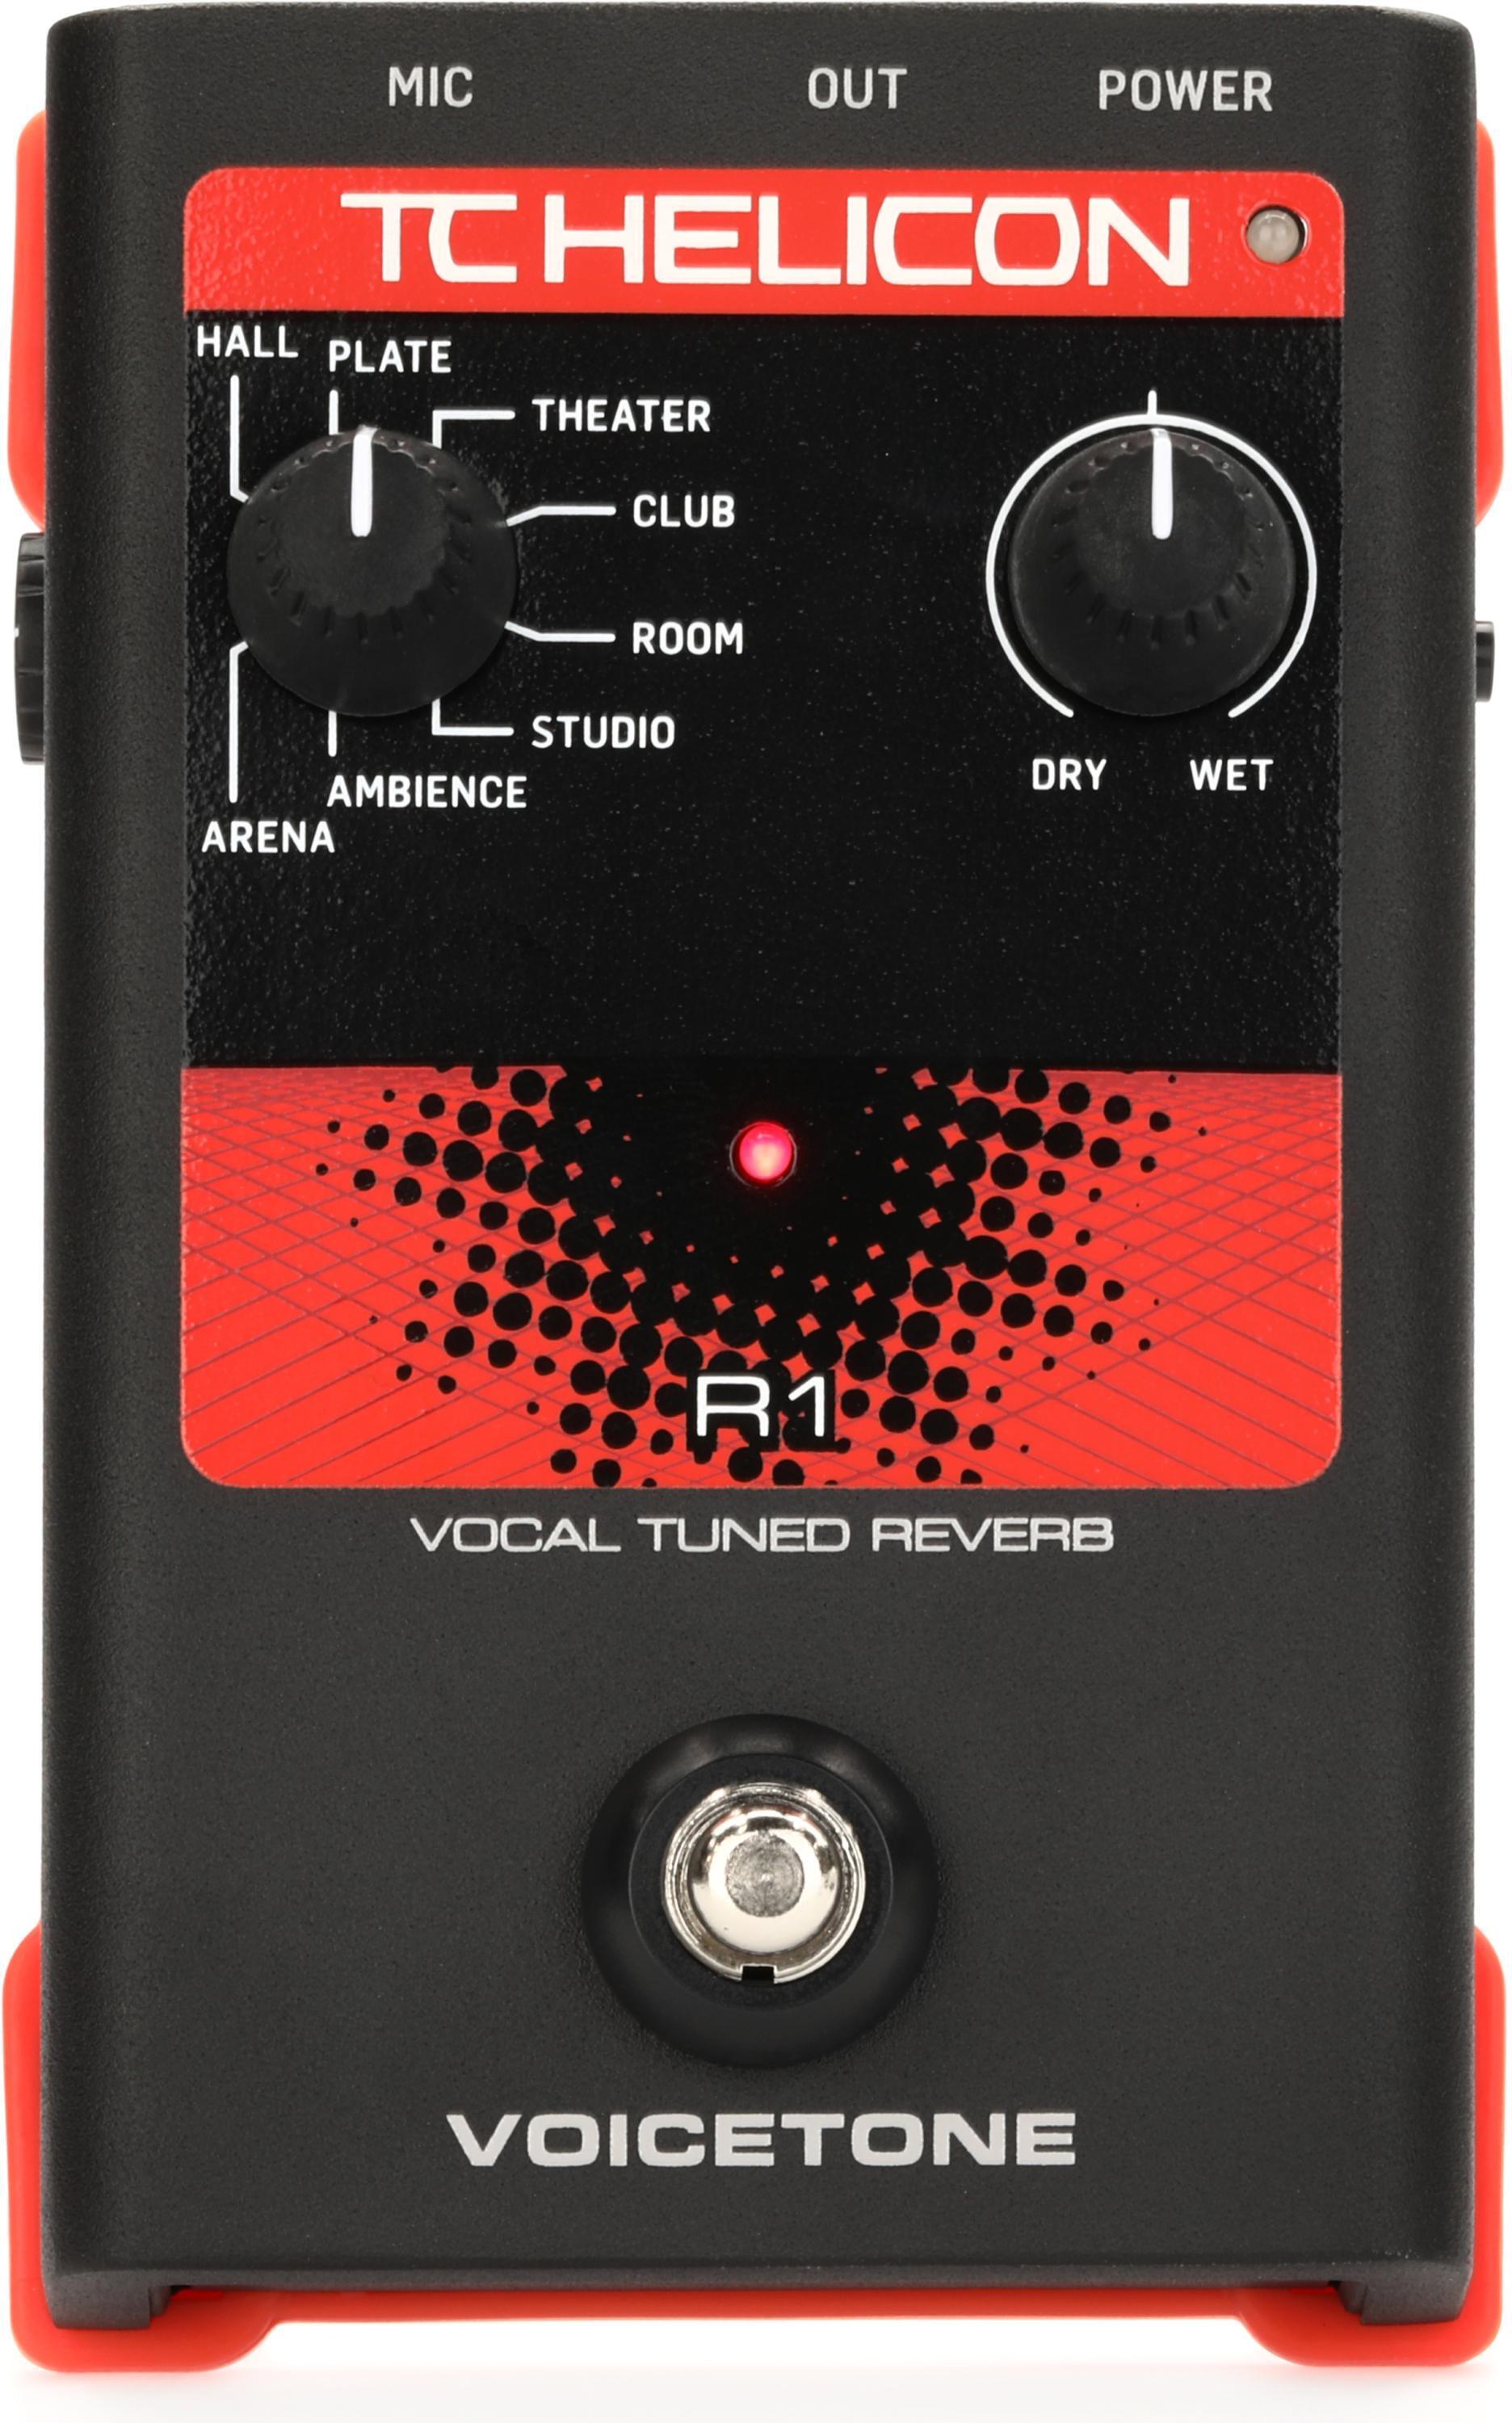 TC-Helicon VoiceTone R1 Vocal Reverb Pedal | Sweetwater